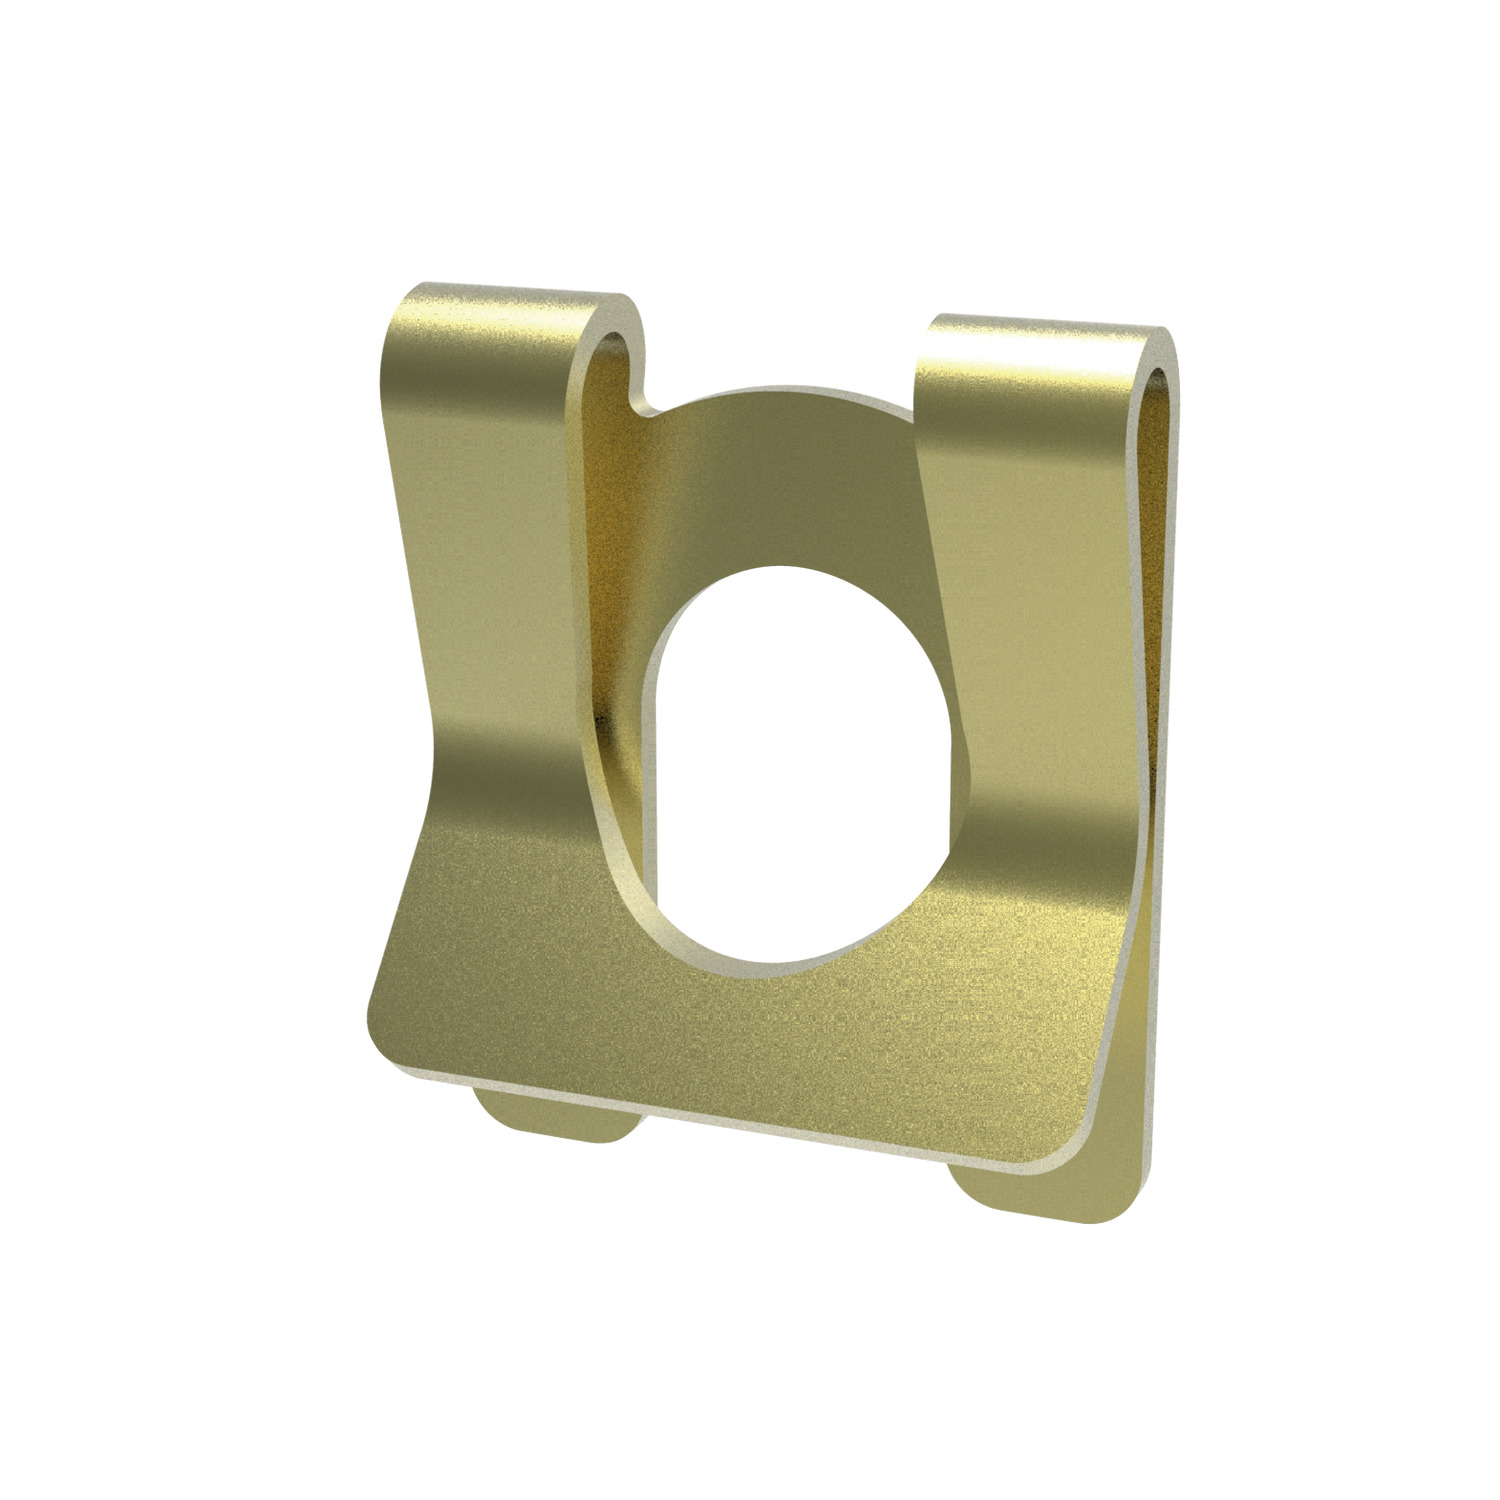 Safety Fastener  - Imperial (SLI) Yellow zinc-plated safety fastener. Easily assemble and remove by hand without special tools. Compatible with clevis pins.